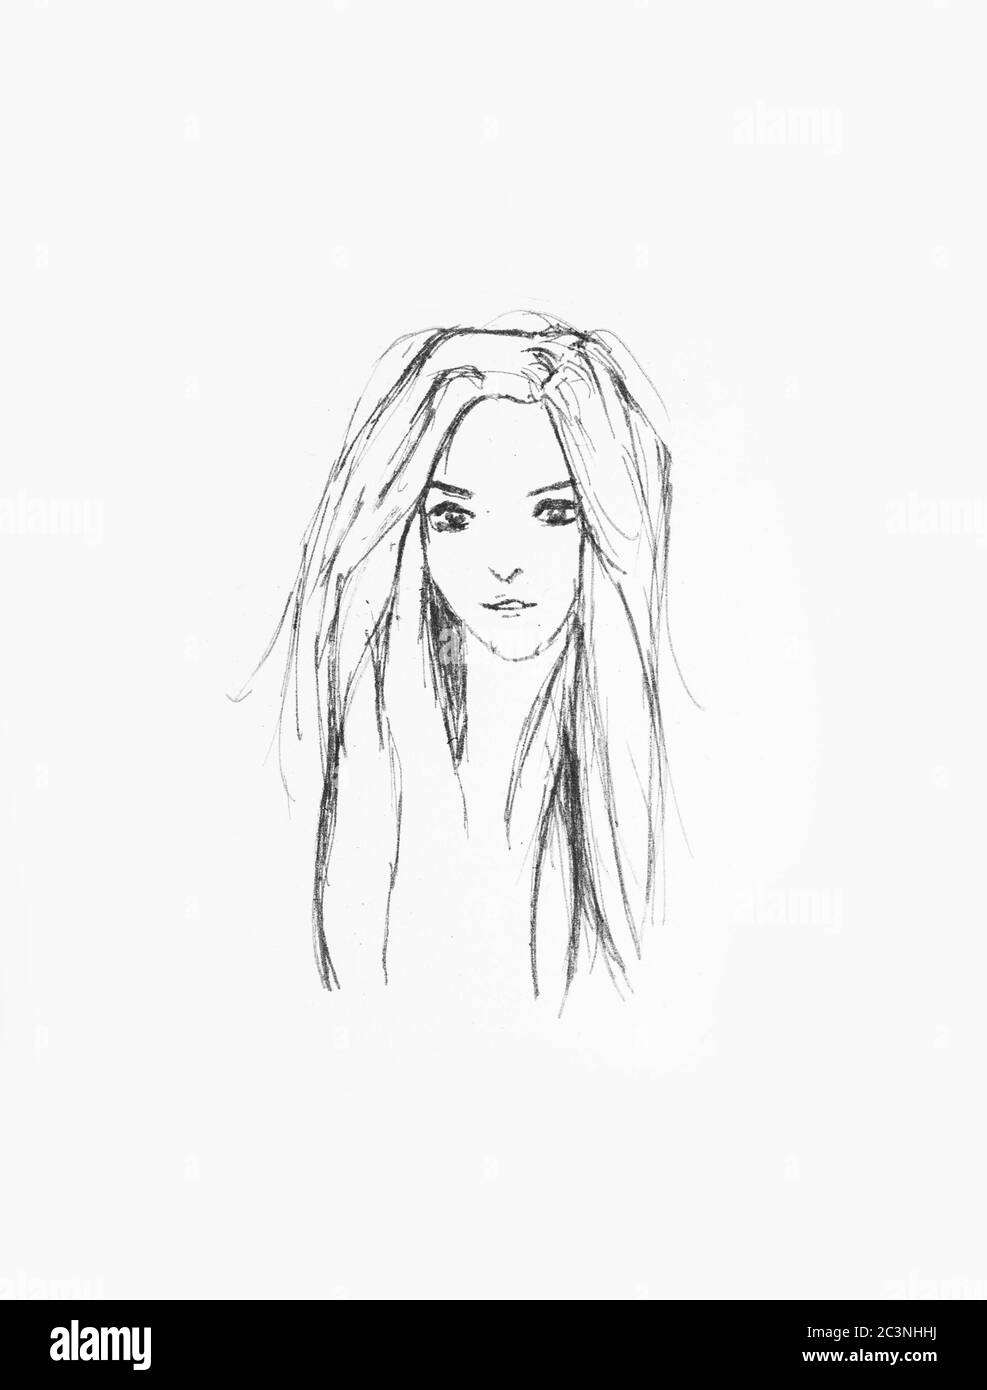 Hand Drawn Beautiful Girl Portrait - Pencil Sketch Of An Anime Girl On A White Paper Stock Photo